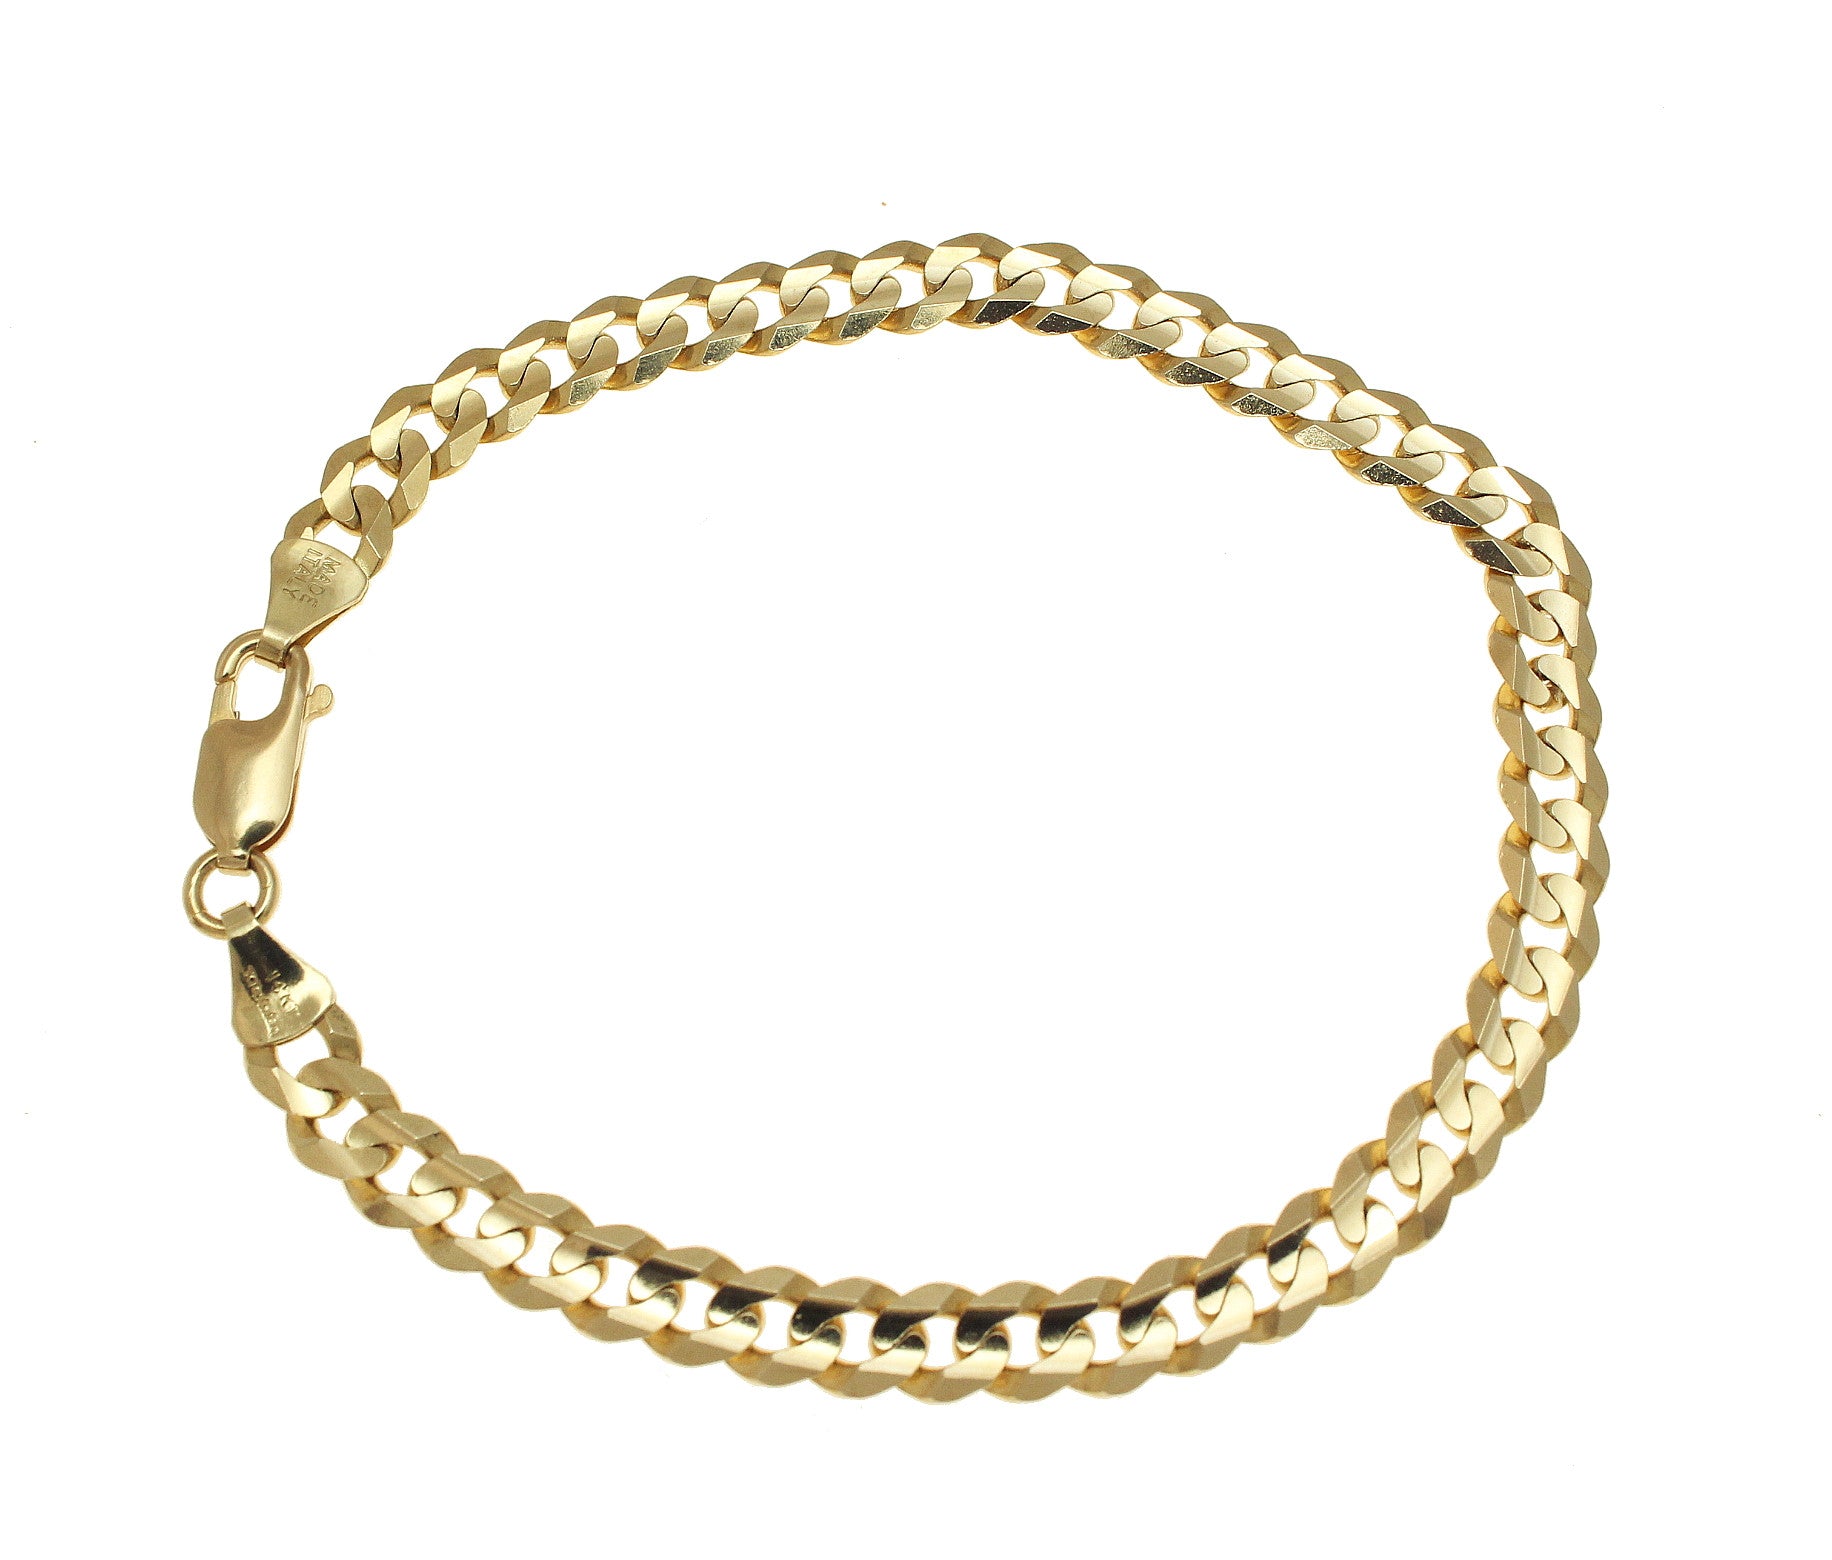 SOLID 14K YELLOW GOLD MADE IN ITALY CUBAN CURB LINK BRACELET 8.25 INCH –  Arthur's Jewelry